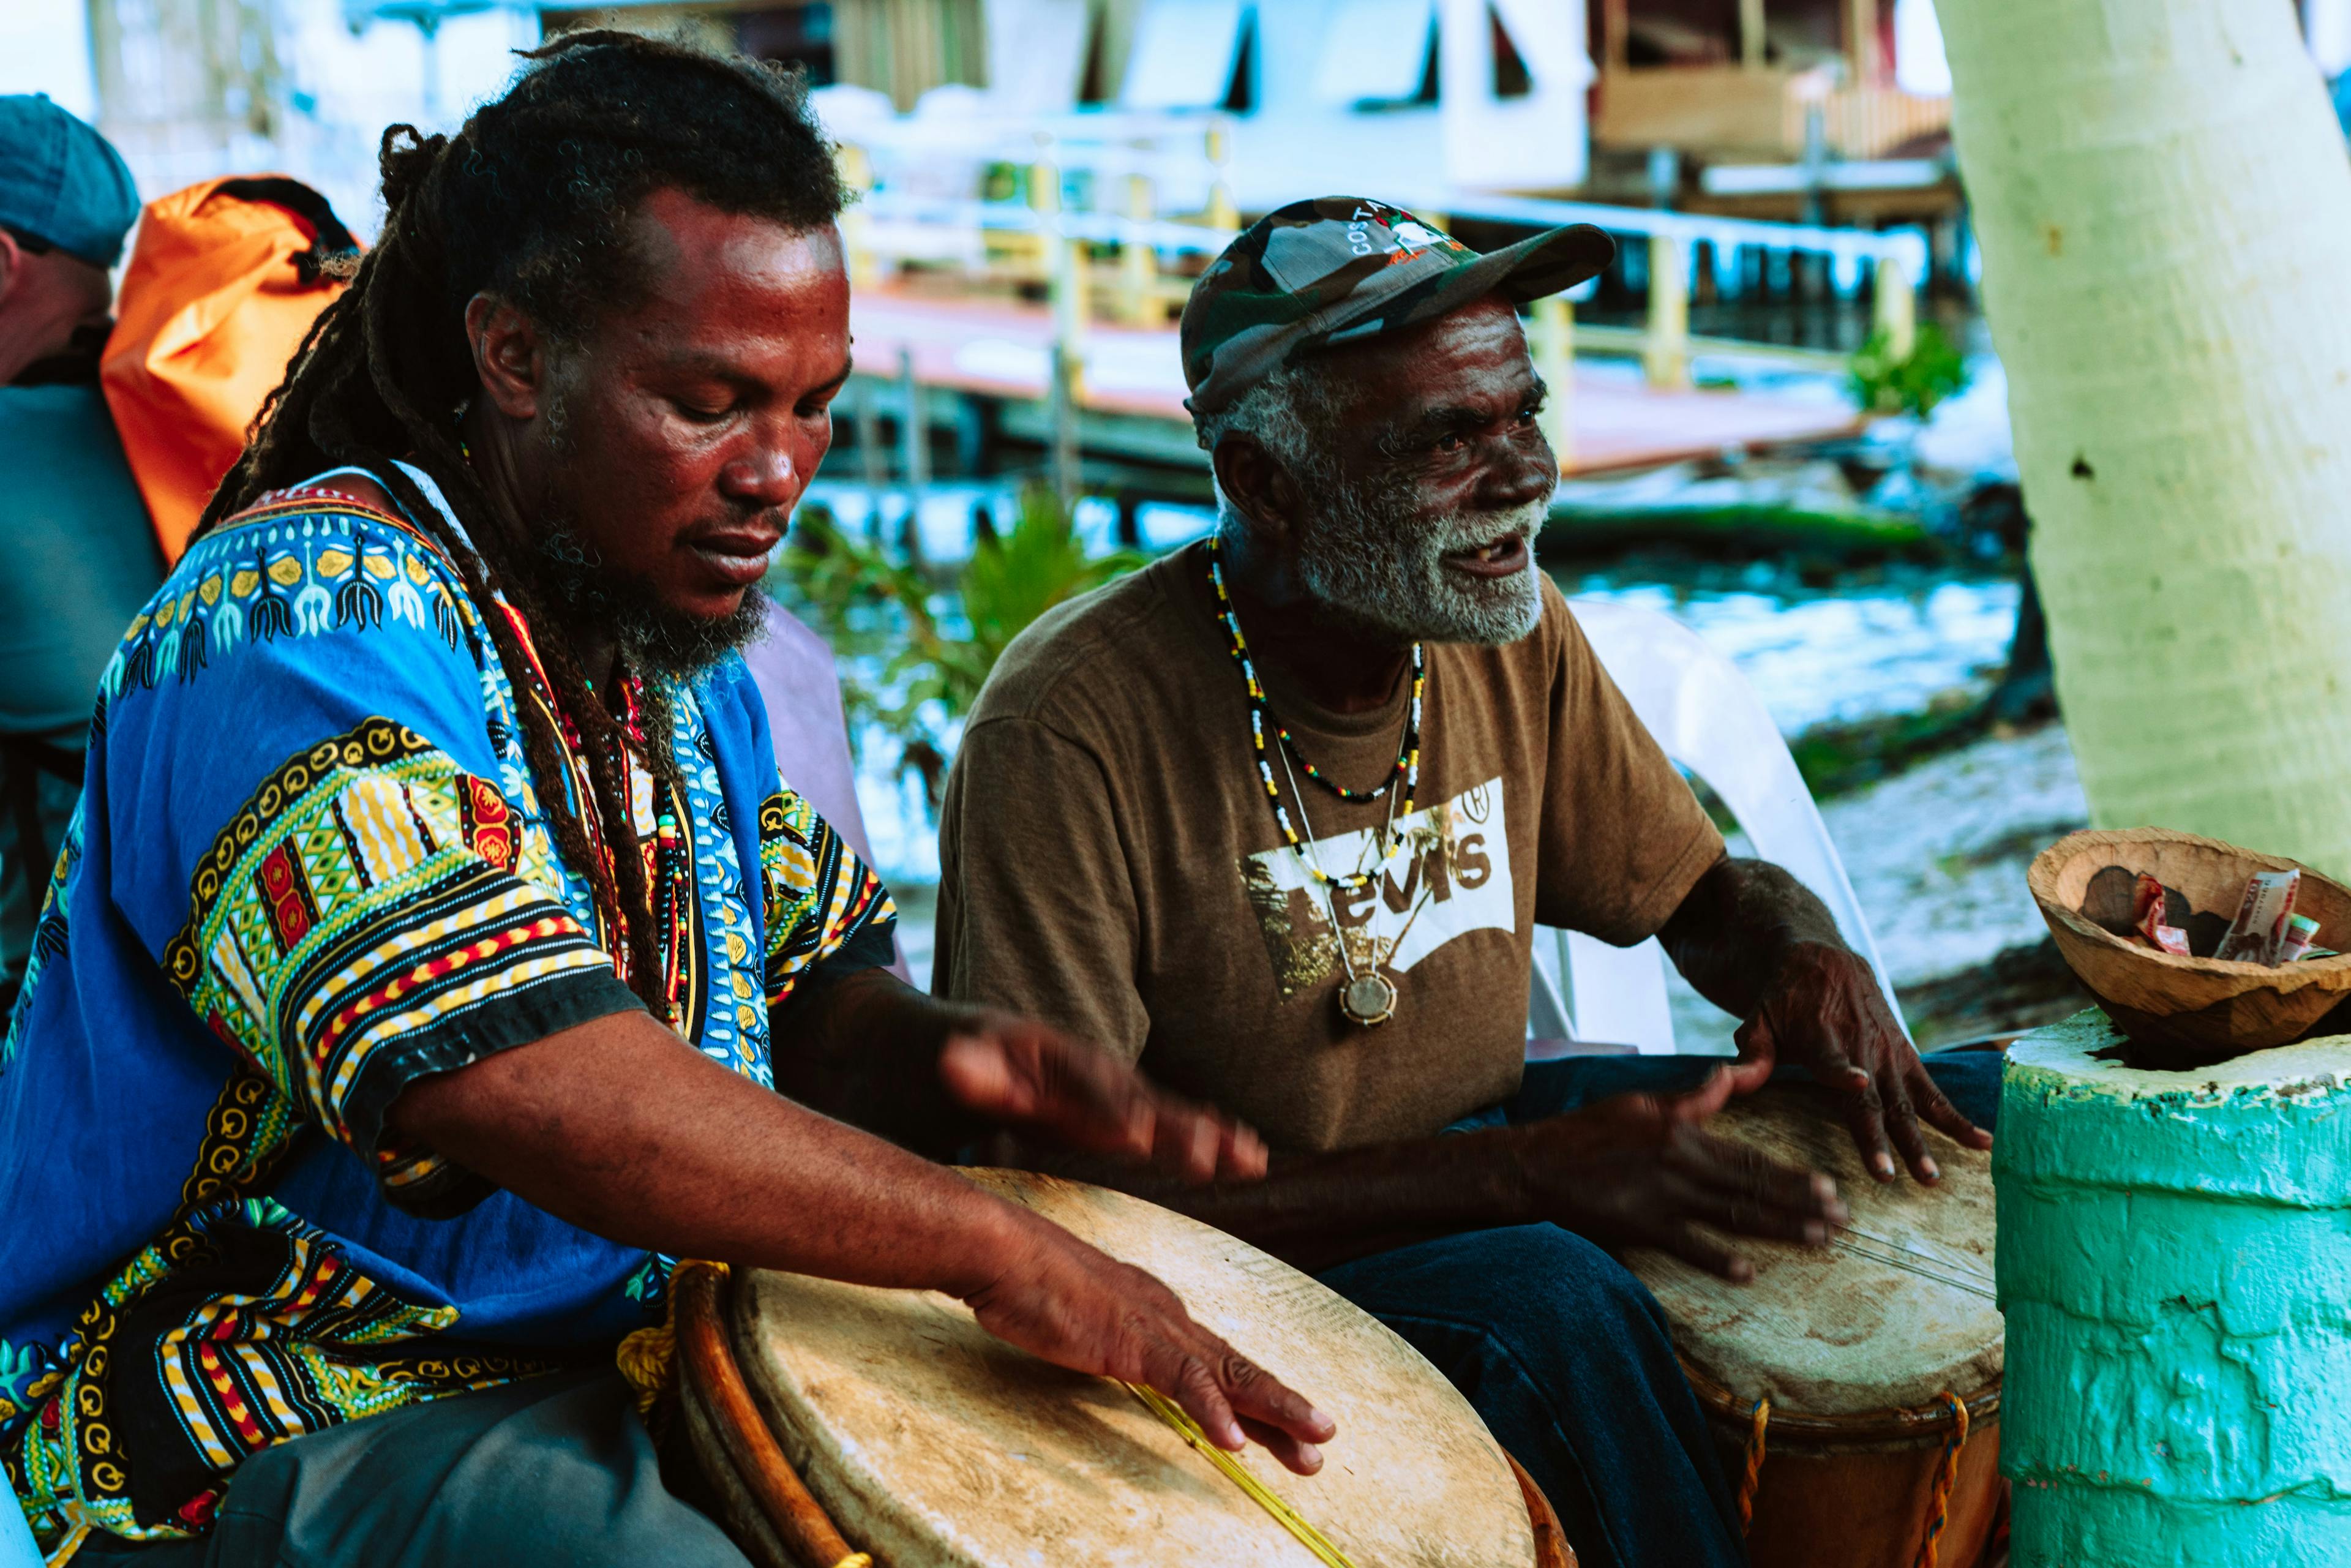 Two men in Belize one with a blue patterned shirt and one with a brown shirt both playing bongo drums